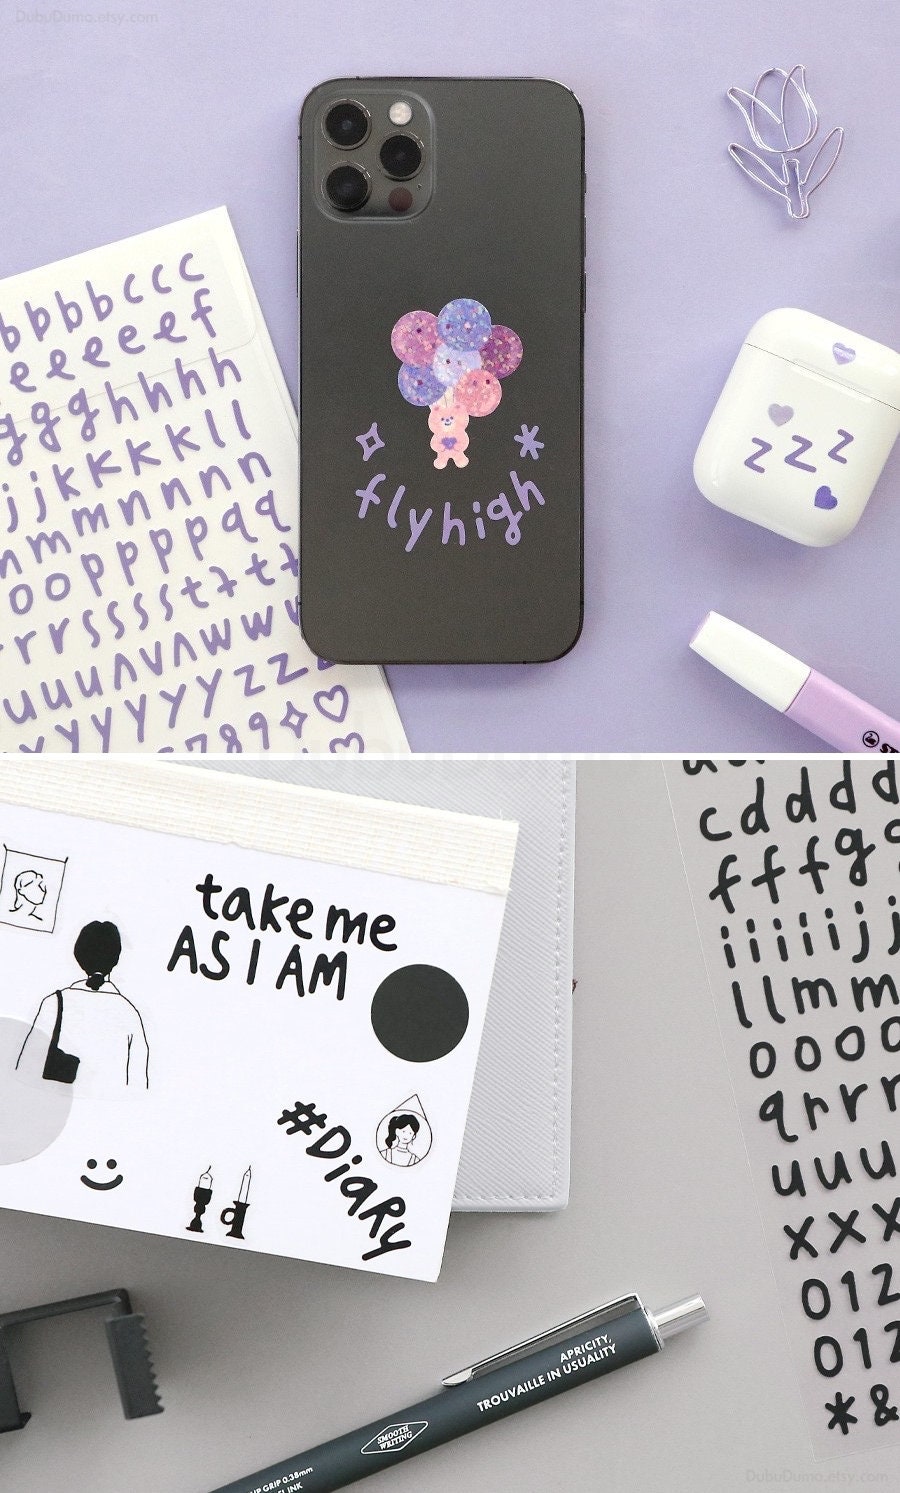 Calligraphy Alphabet Sticker Pack 10sheets / Removable Capital